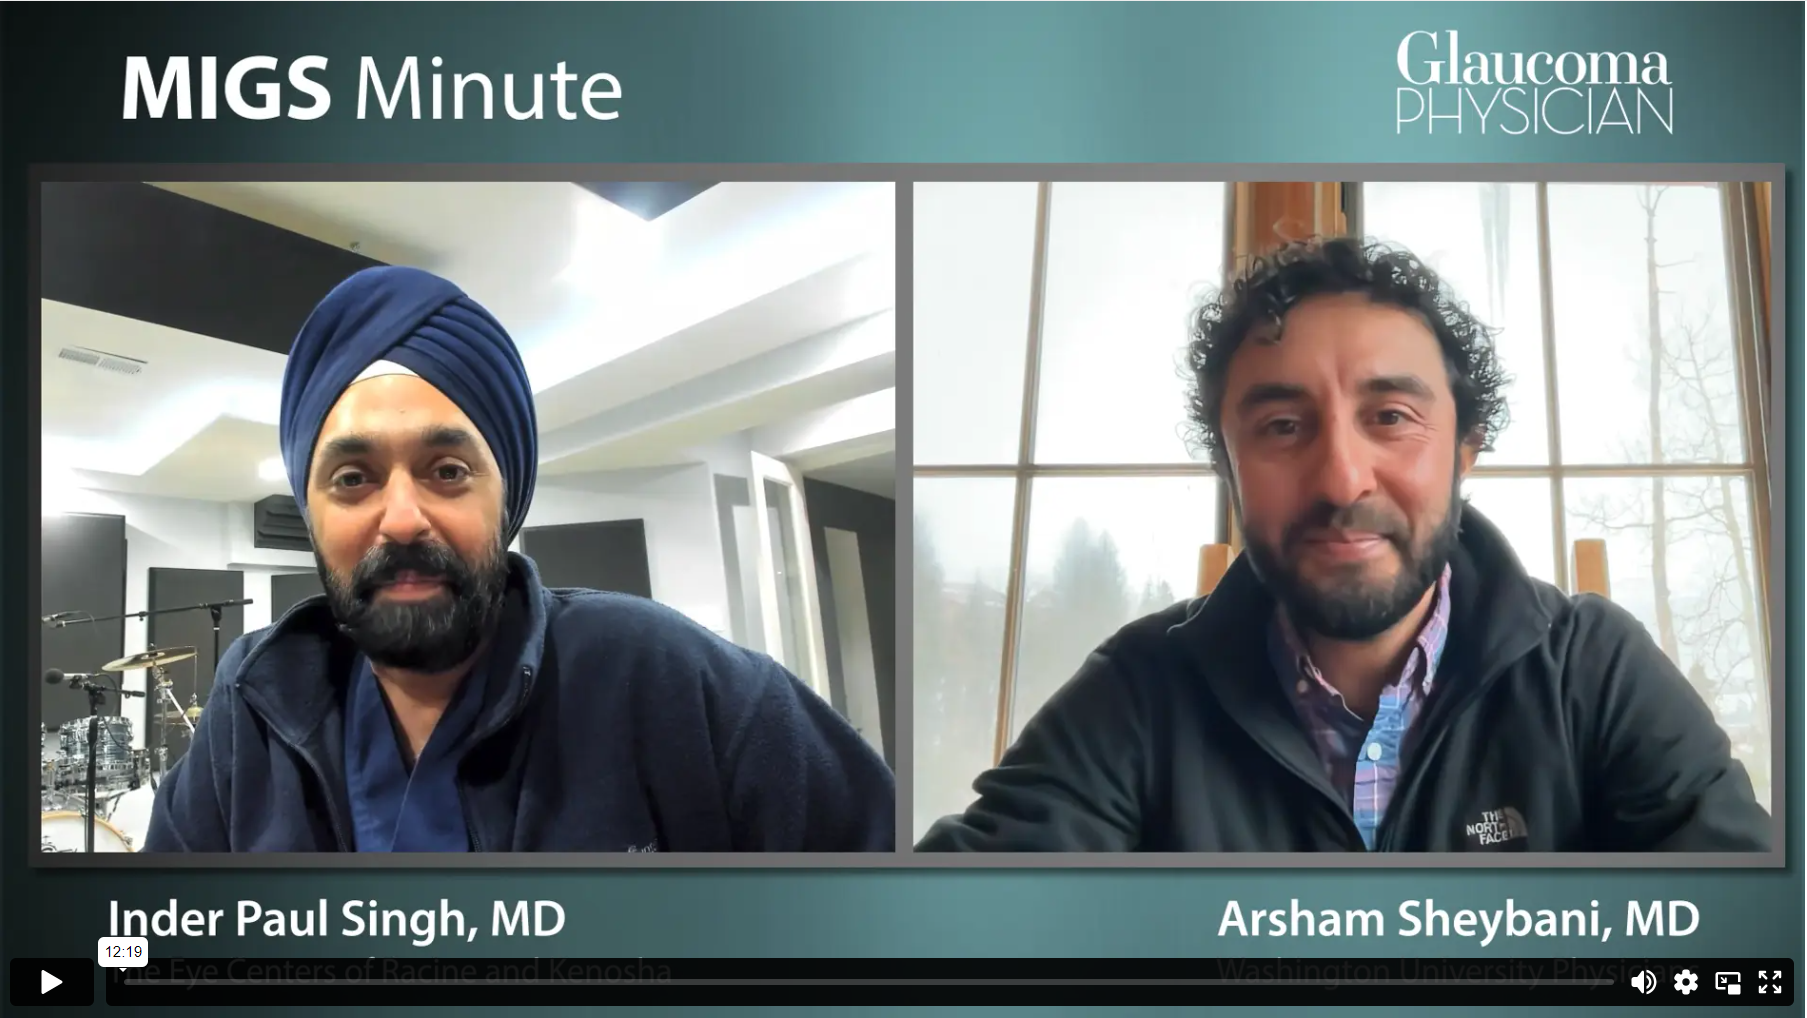 Episode 5: Inder Paul Singh, MD and Arsham Sheybani, MD discuss IOP variability and the cause of pressure rising.